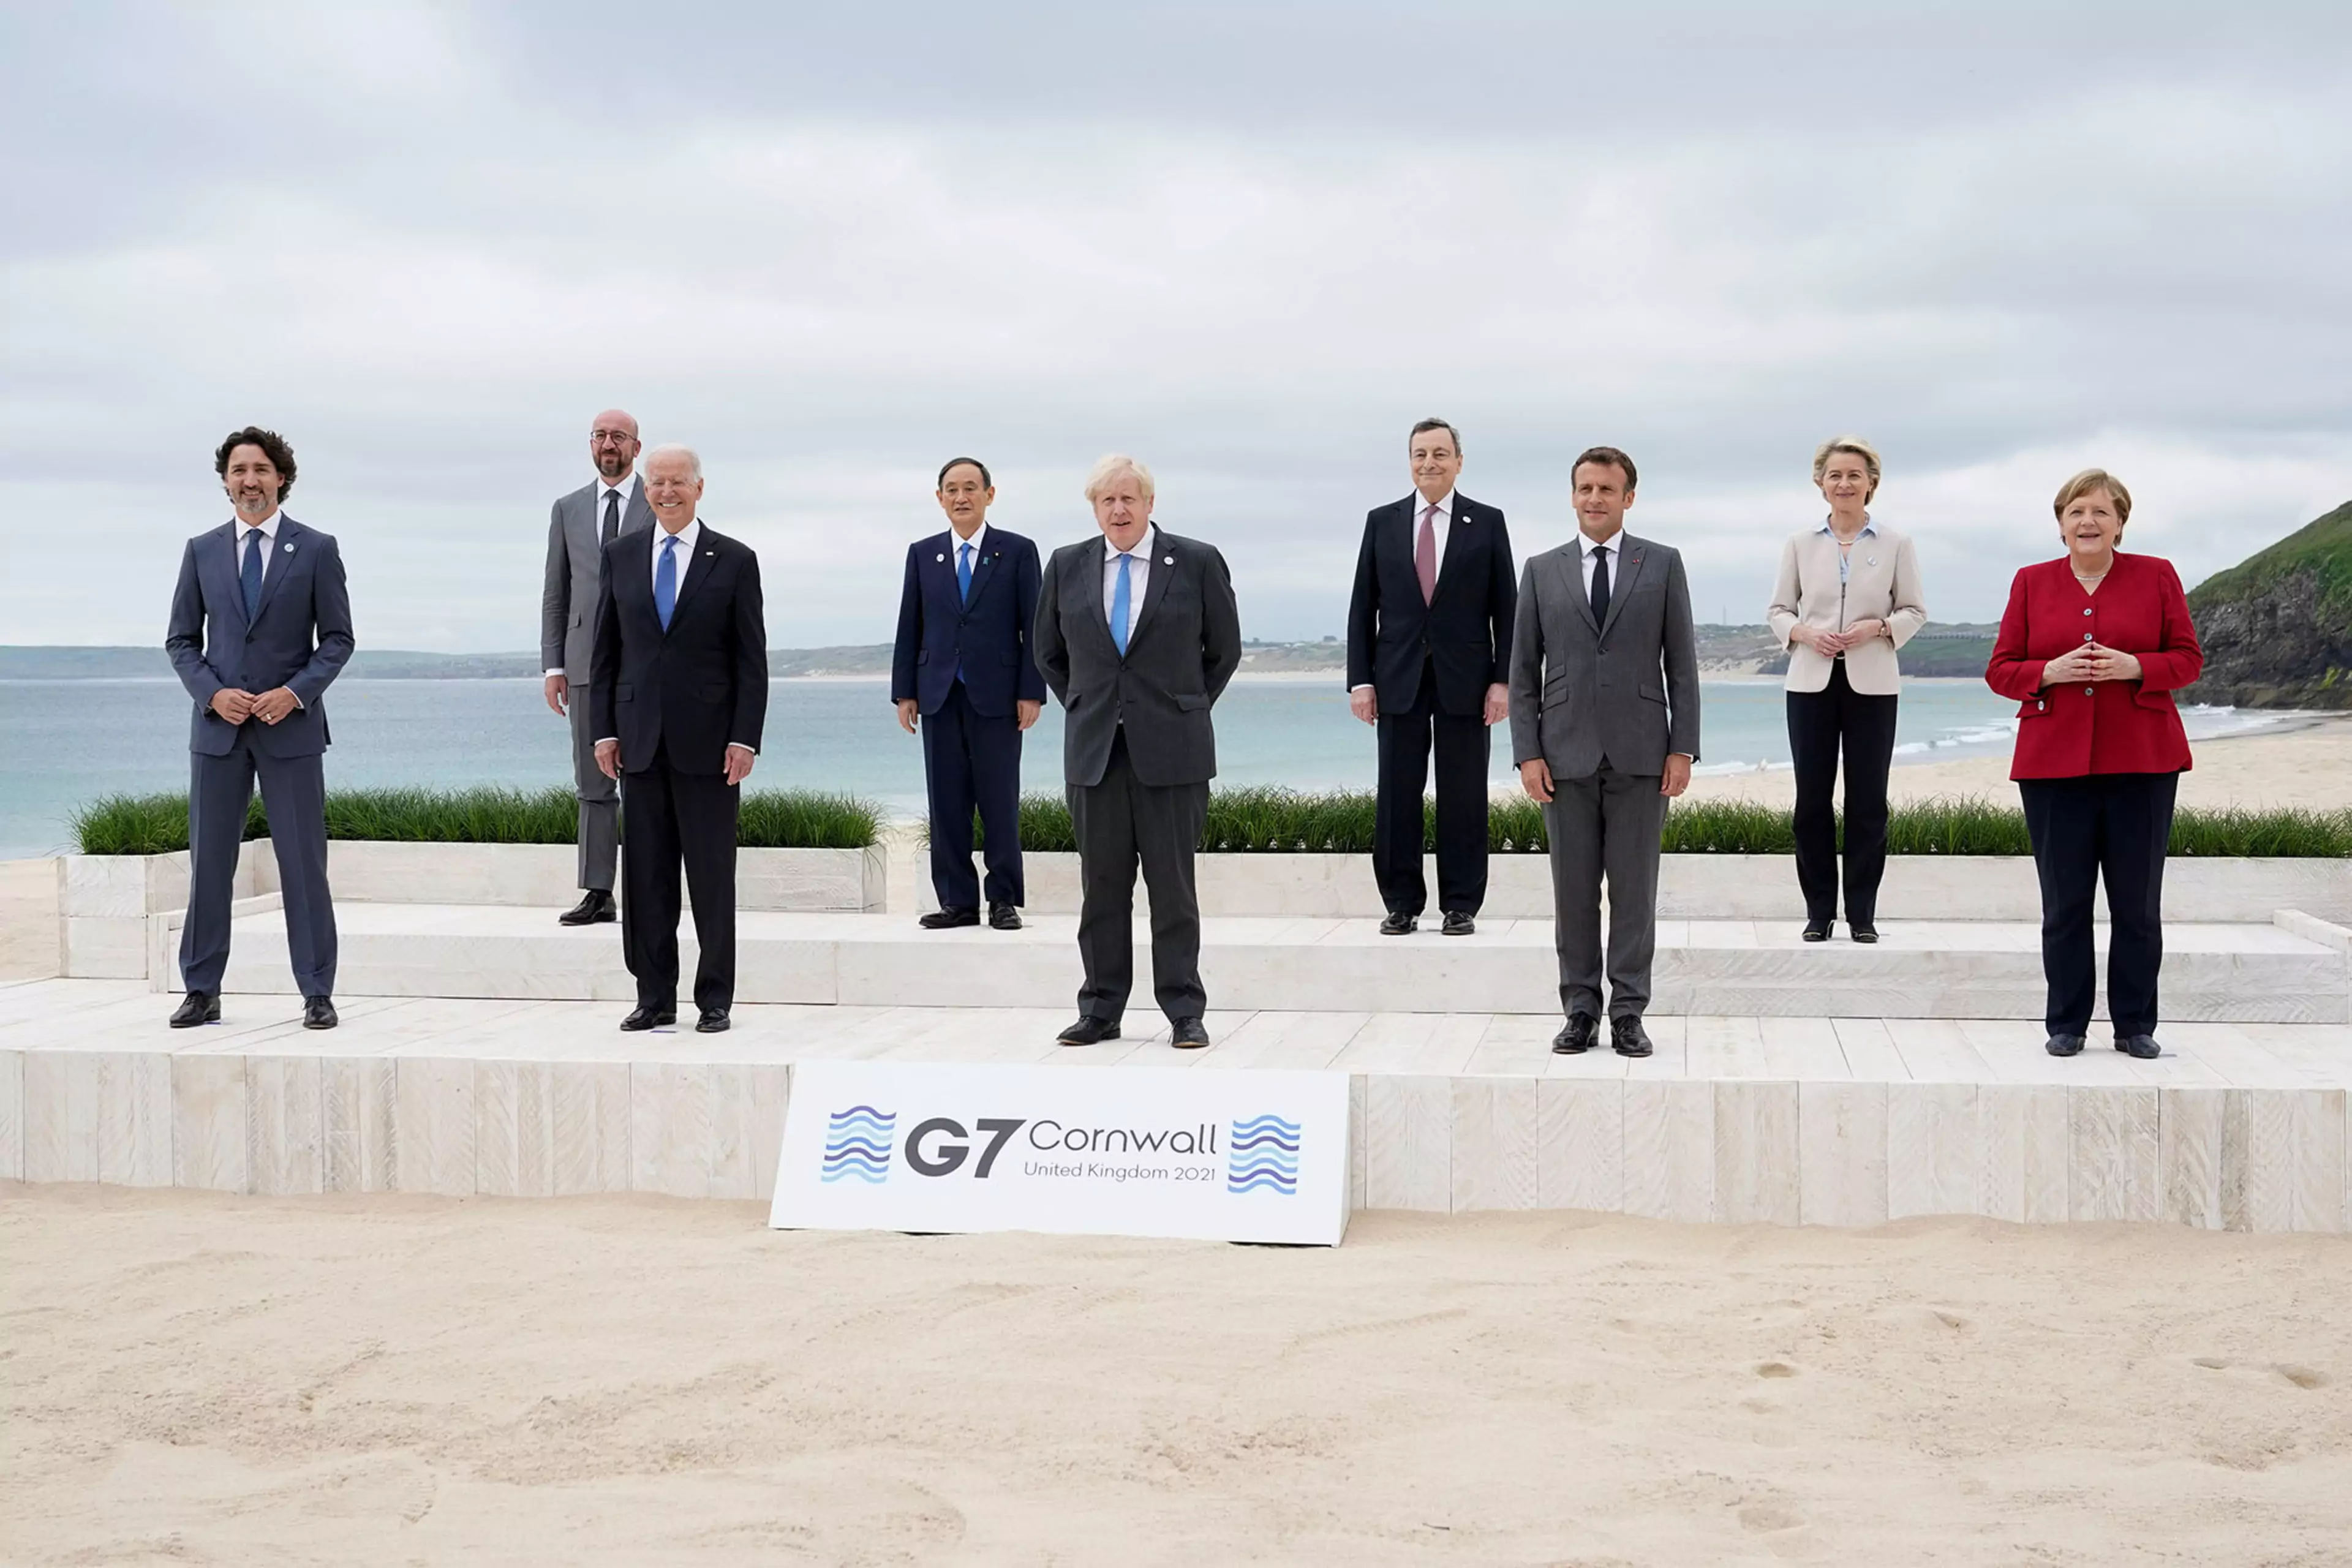 Where Is the G7 Headed? | Council on Foreign Relations